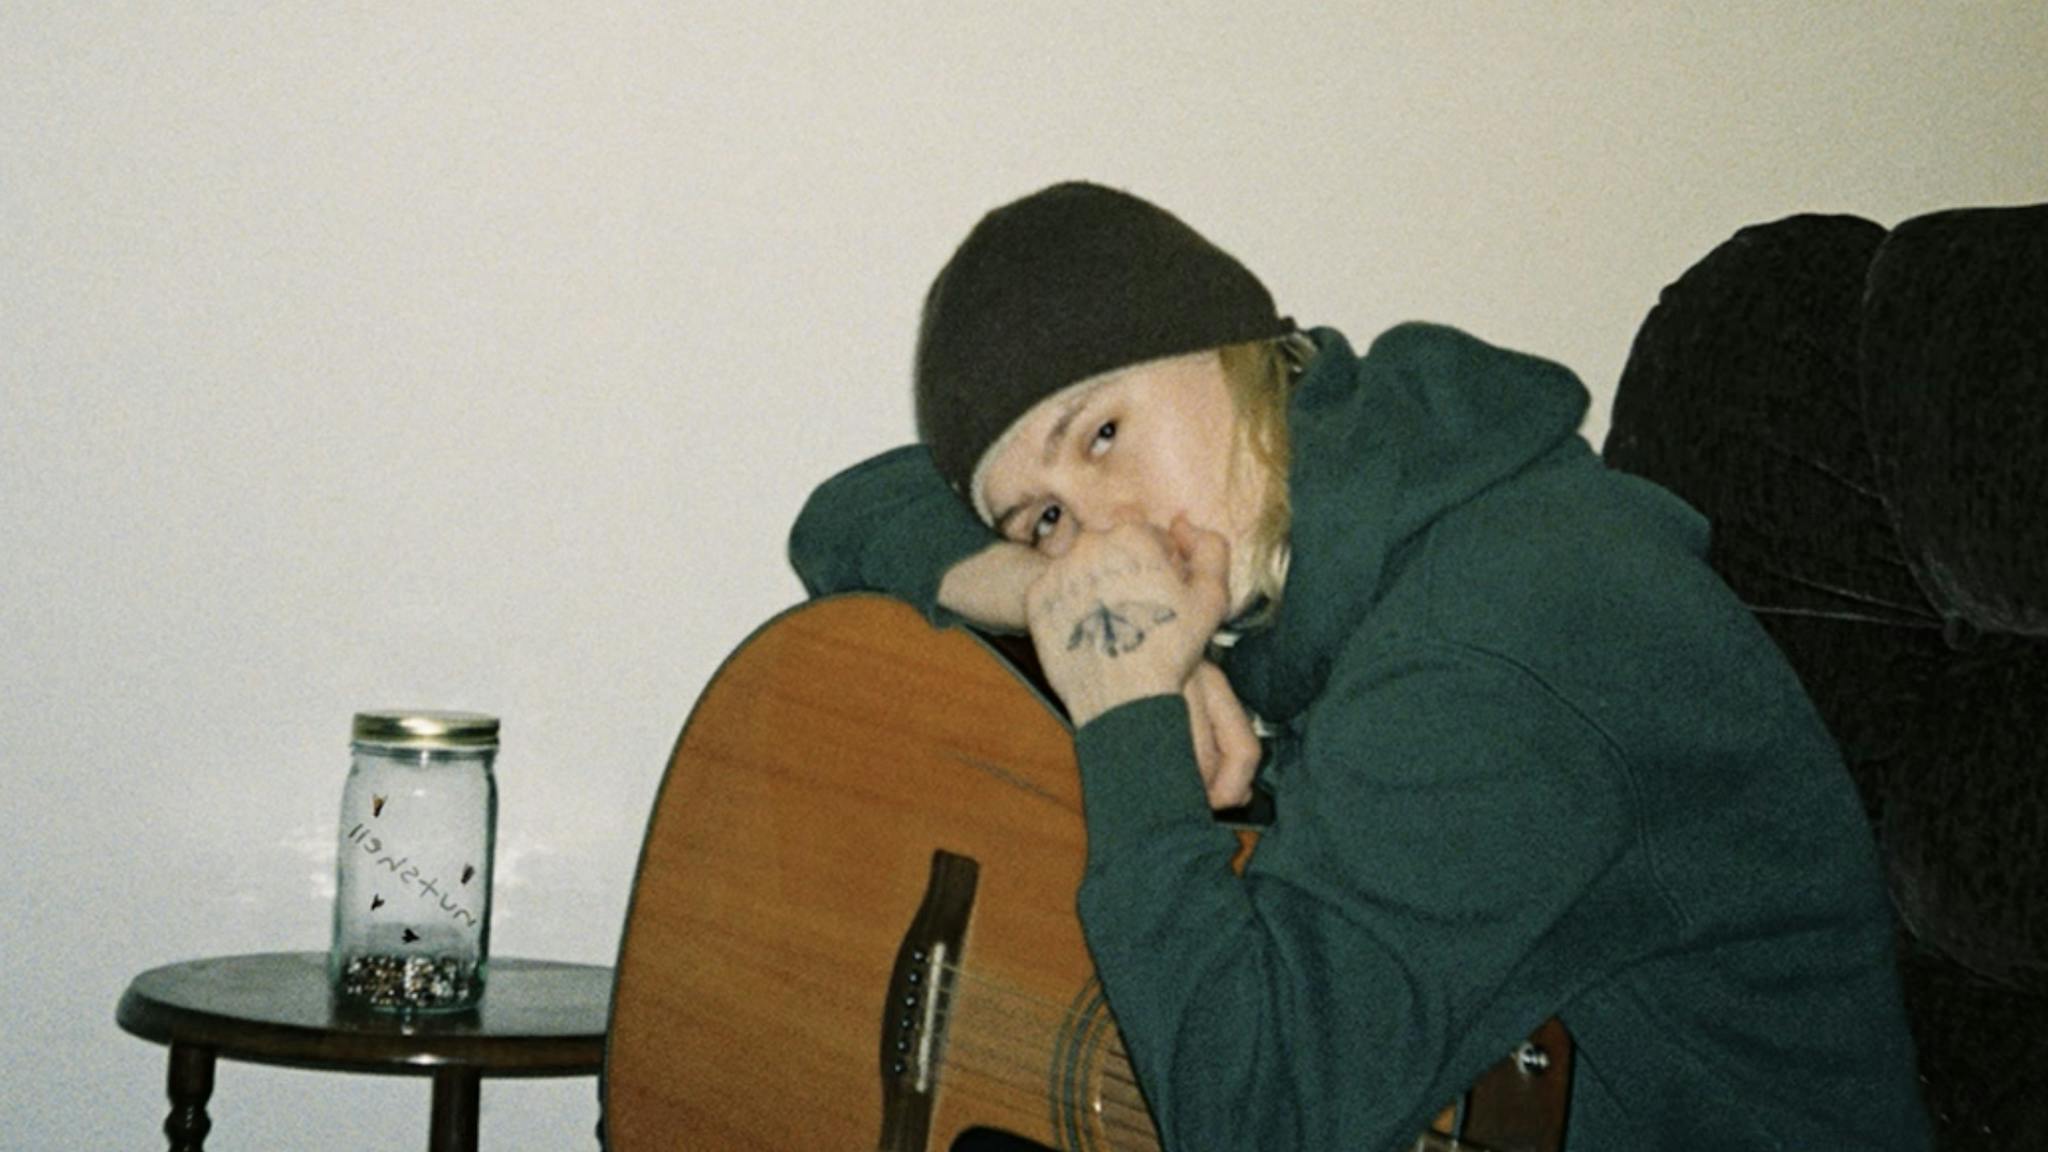 Carlie Hanson covers Nutshell to mark anniversary of Layne Staley’s death